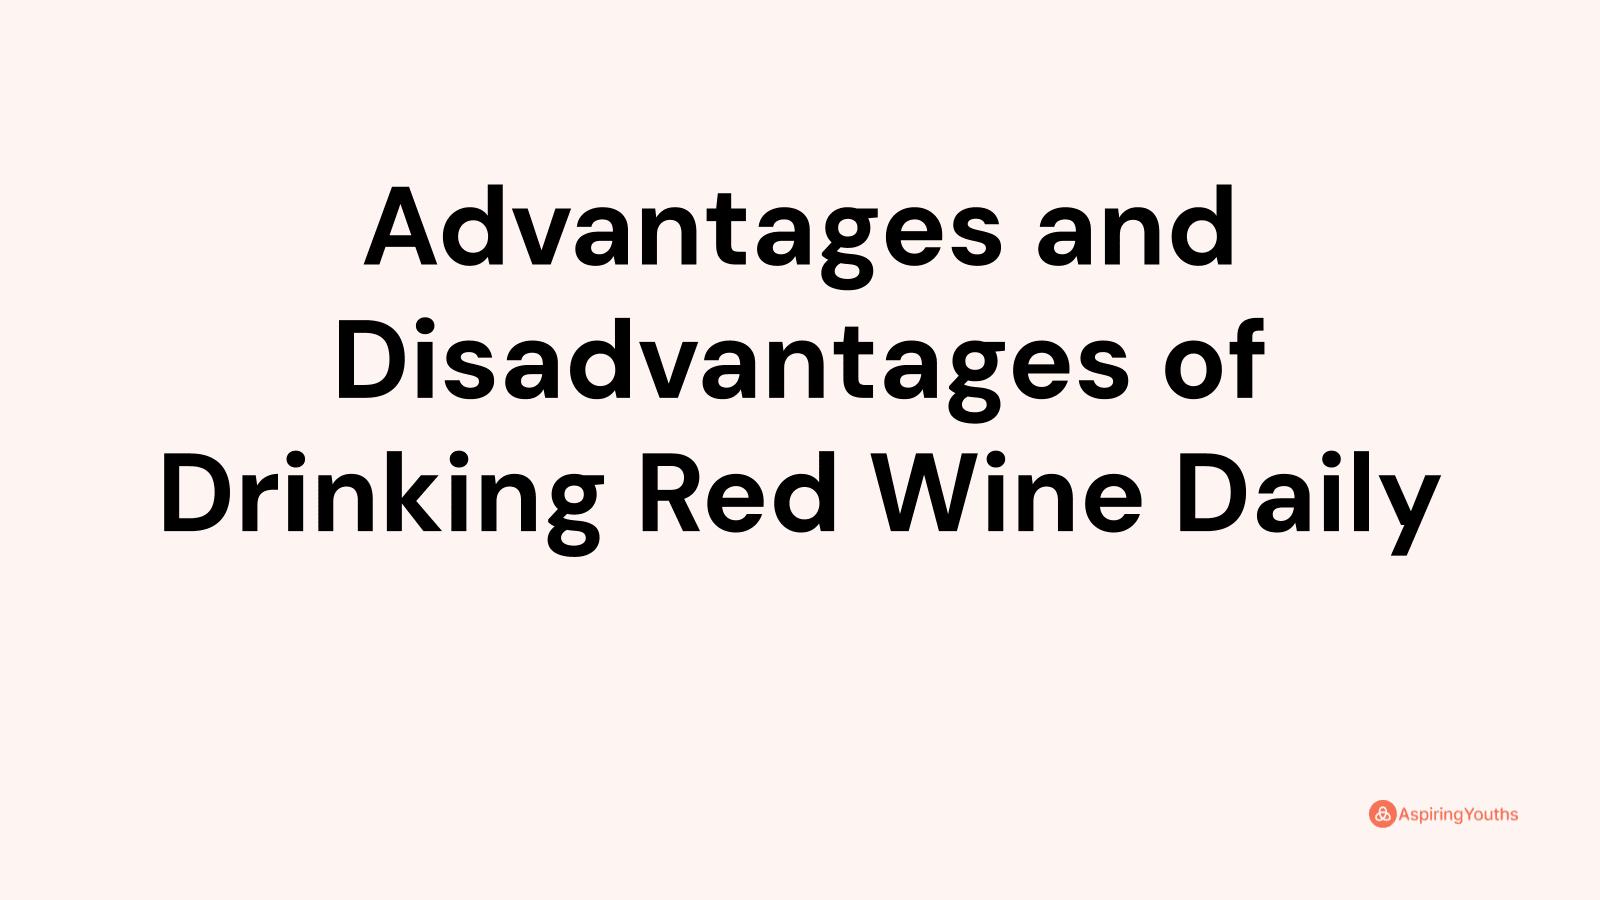 Advantages and Disadvantages of Drinking Red Wine Daily